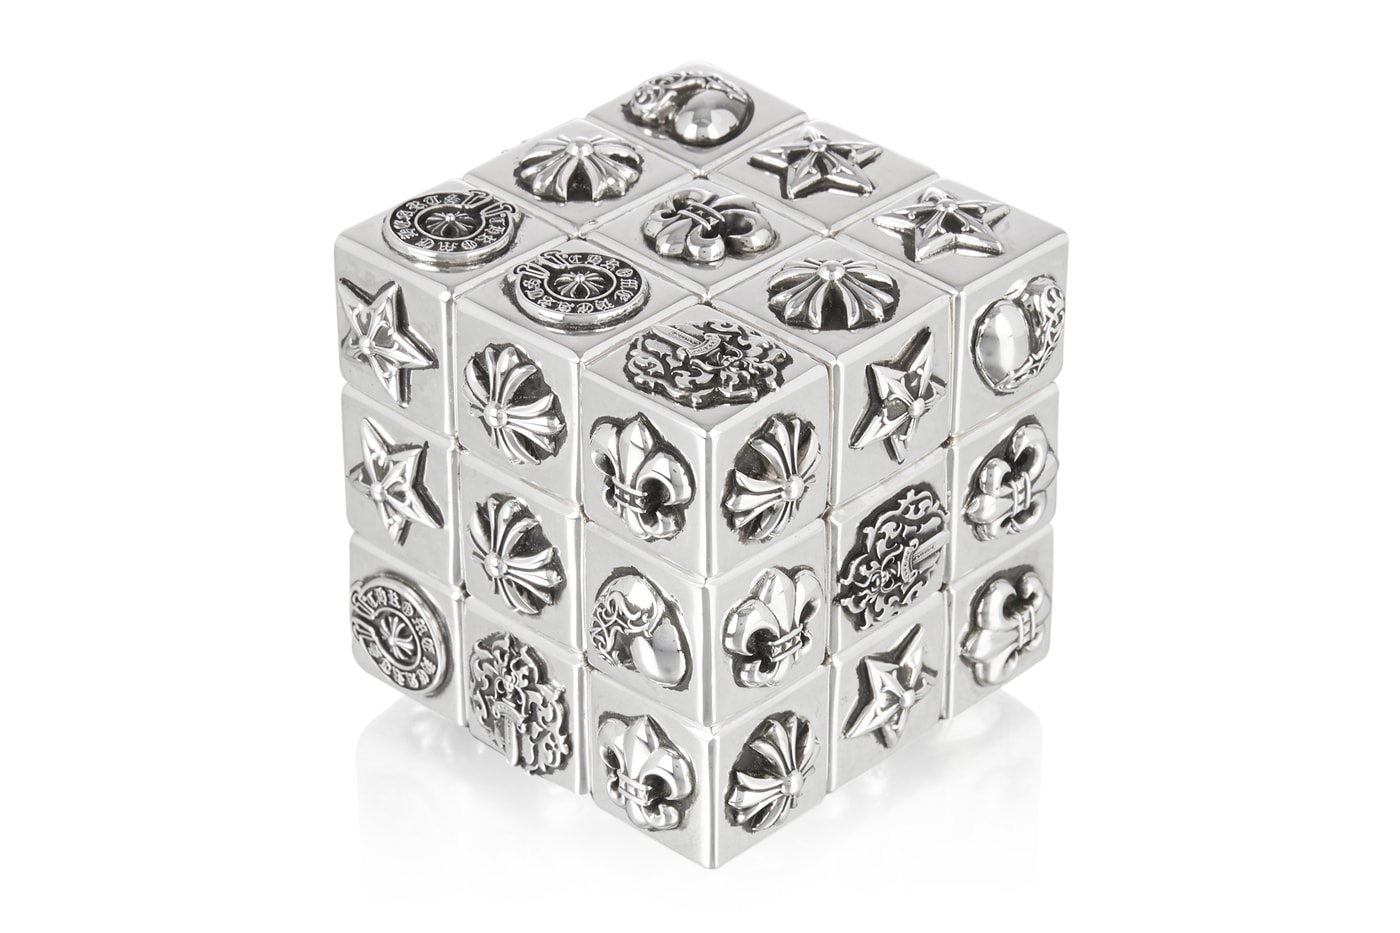 Chrome Hearts Puzzle Rubiks Cube Release Info Buy Price 